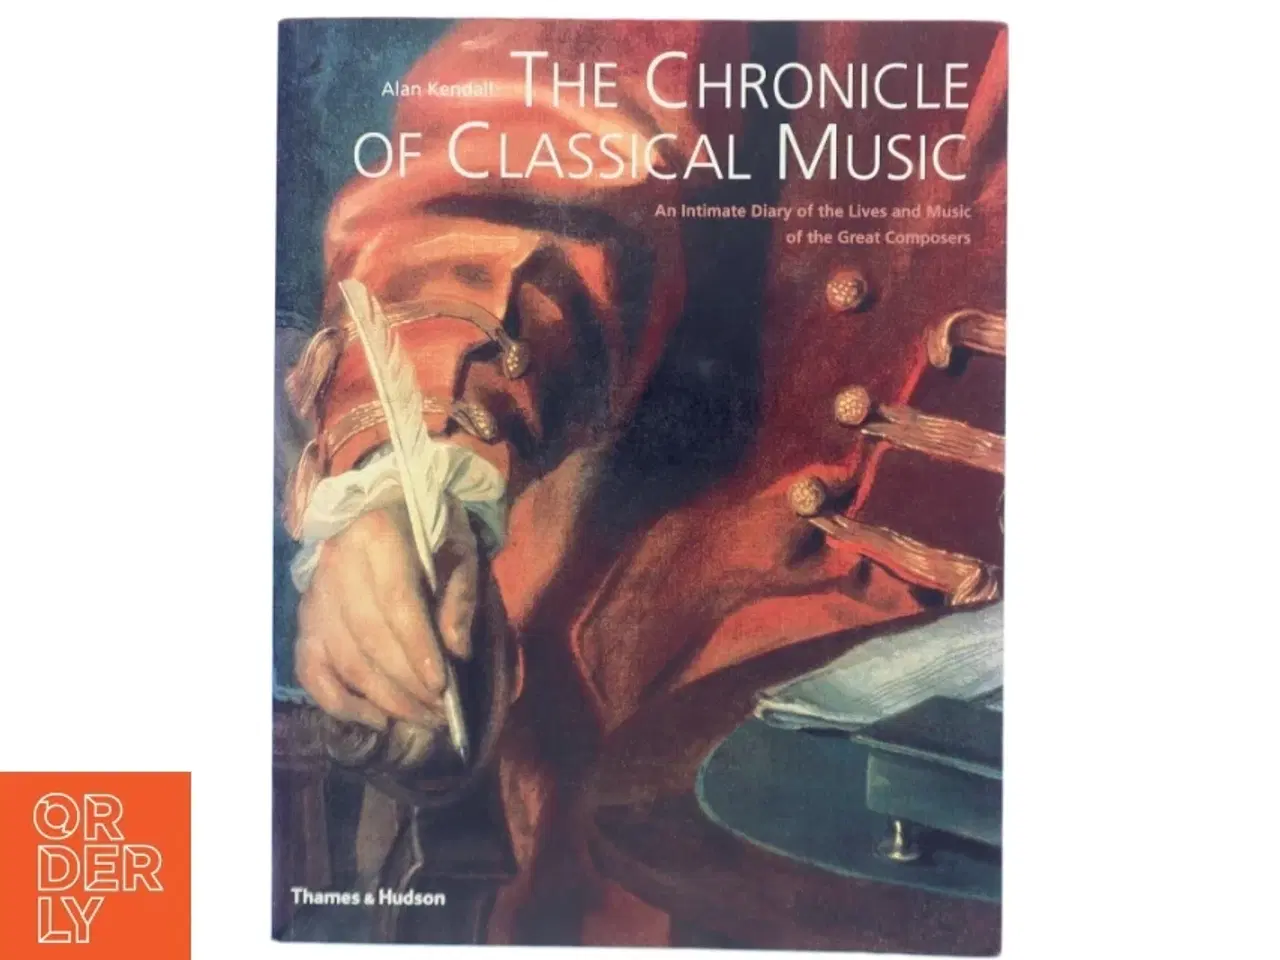 Billede 1 - The chronicle of classical music : an intimate diary of the lives and music of the great composers af Alan Kendall (Bog)